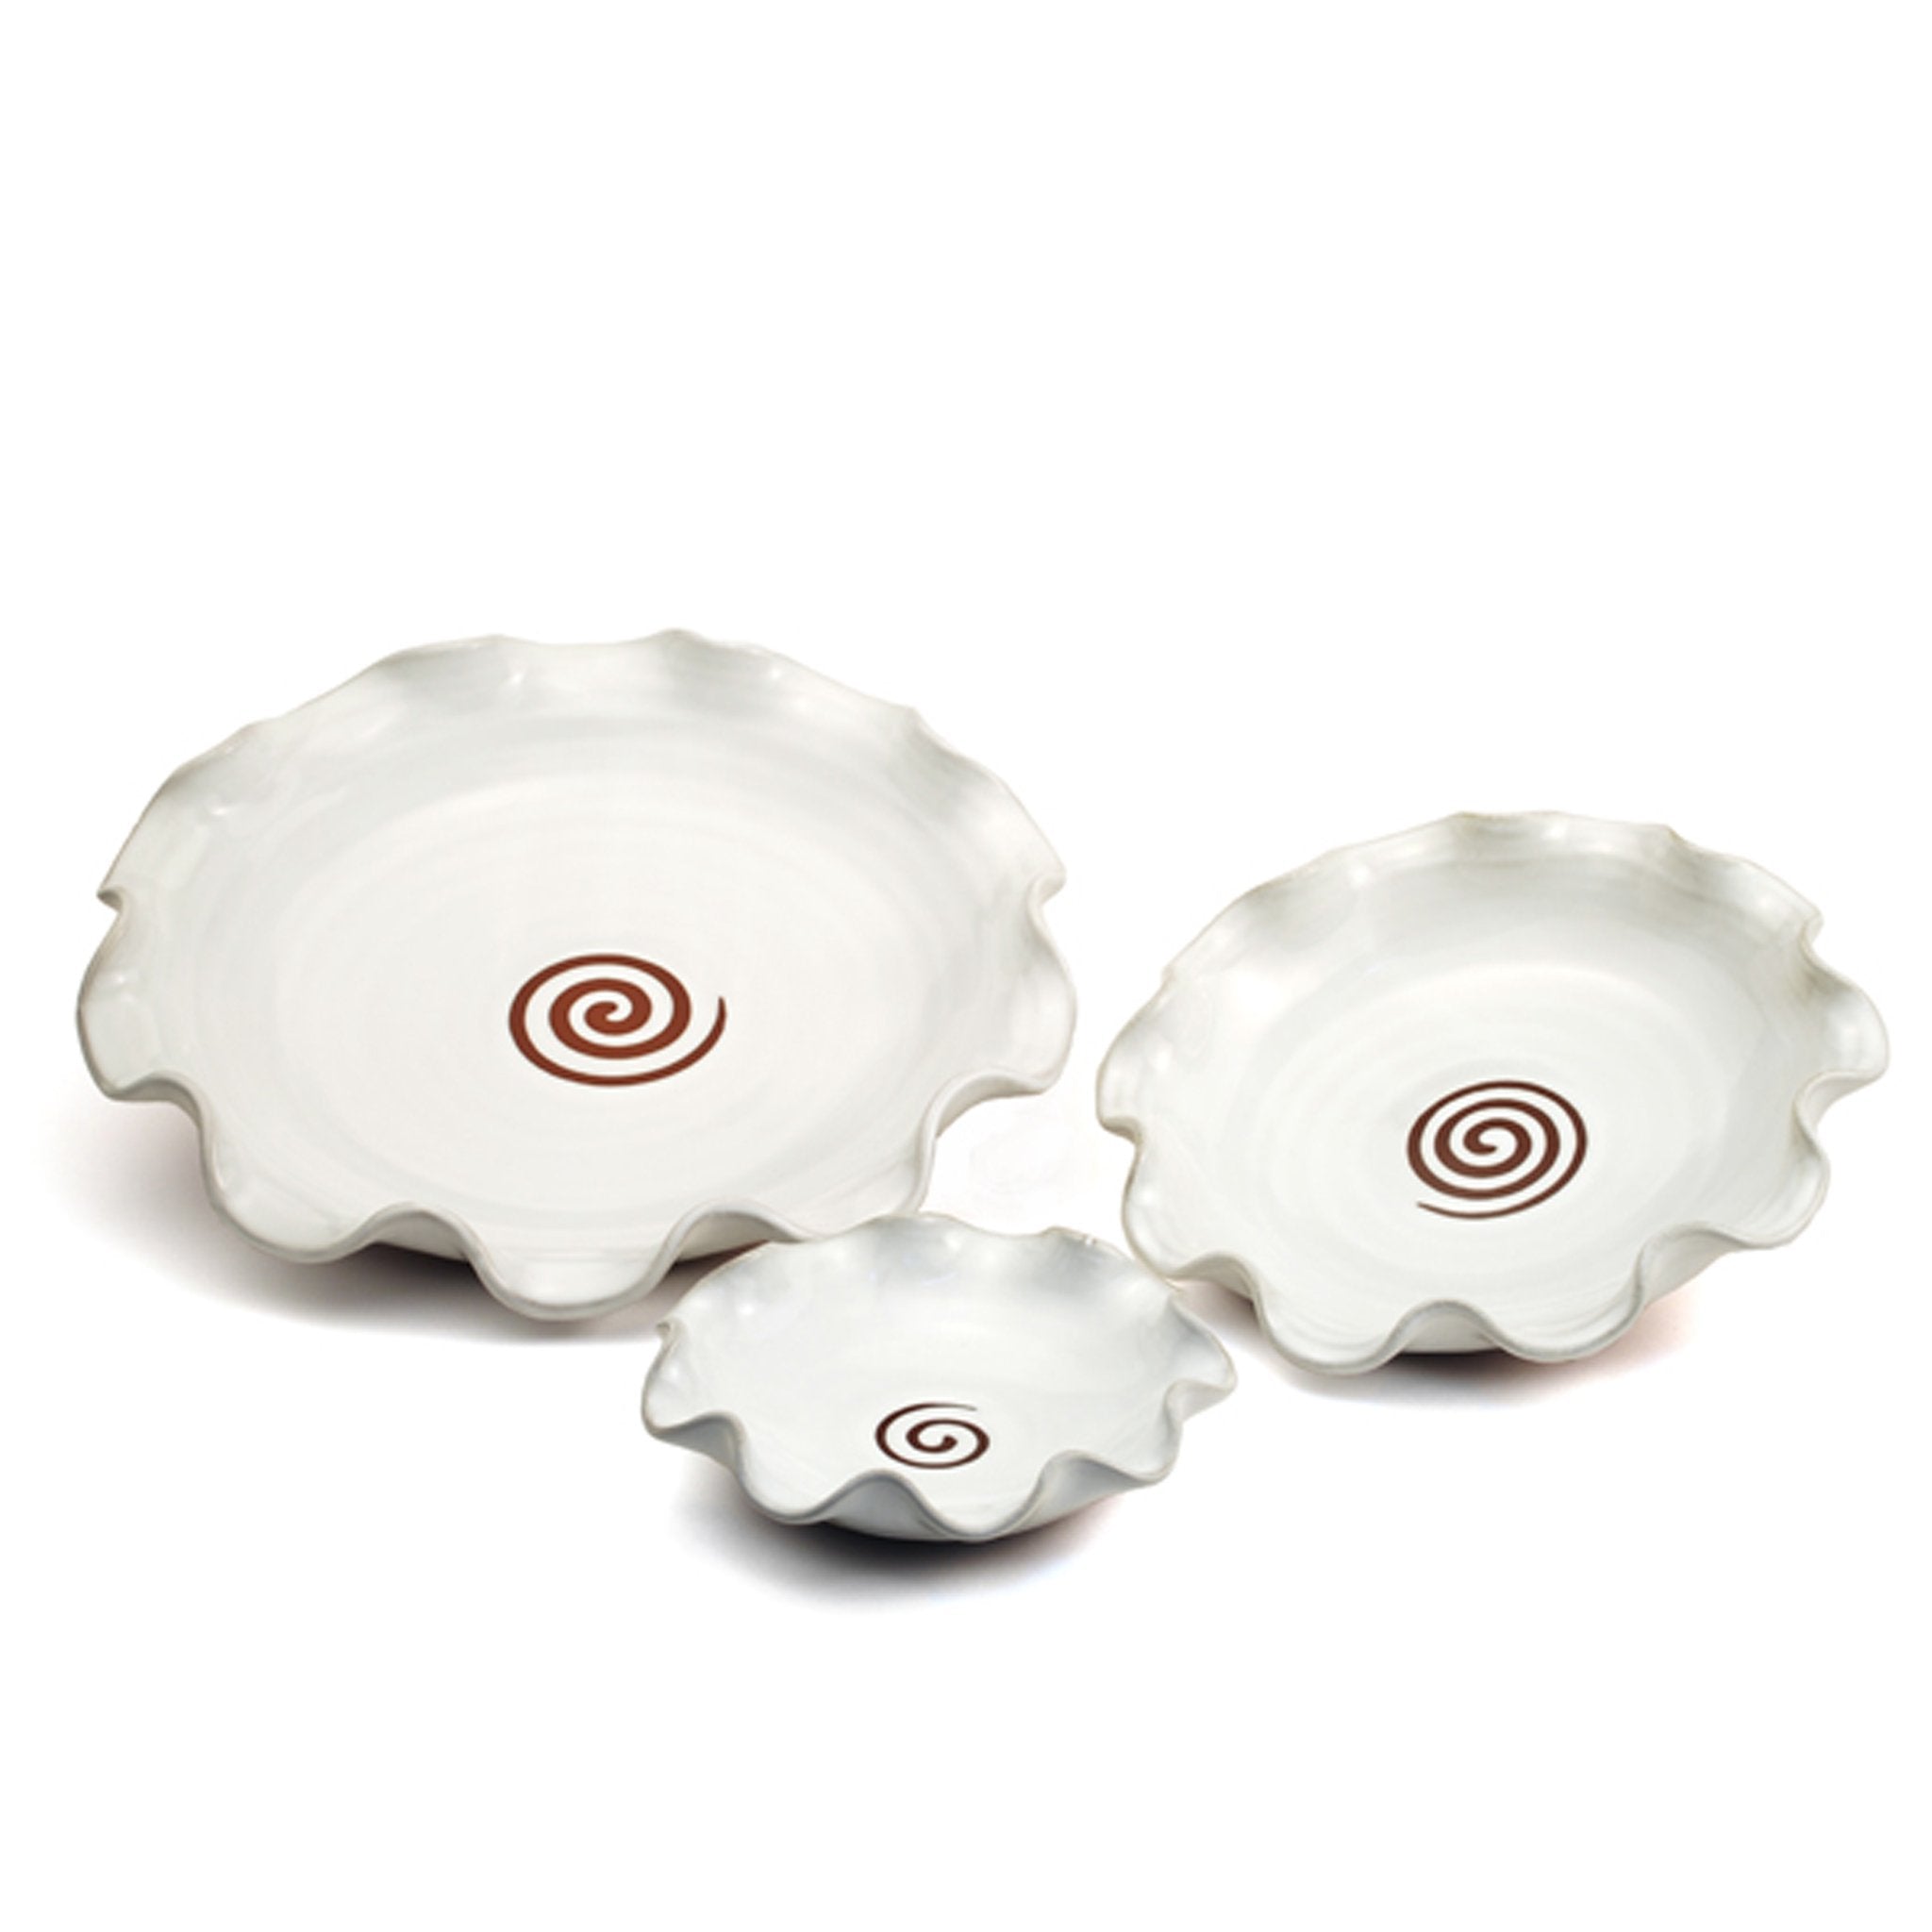 Stephen Pearce Large Curly Salad Dish |2nd